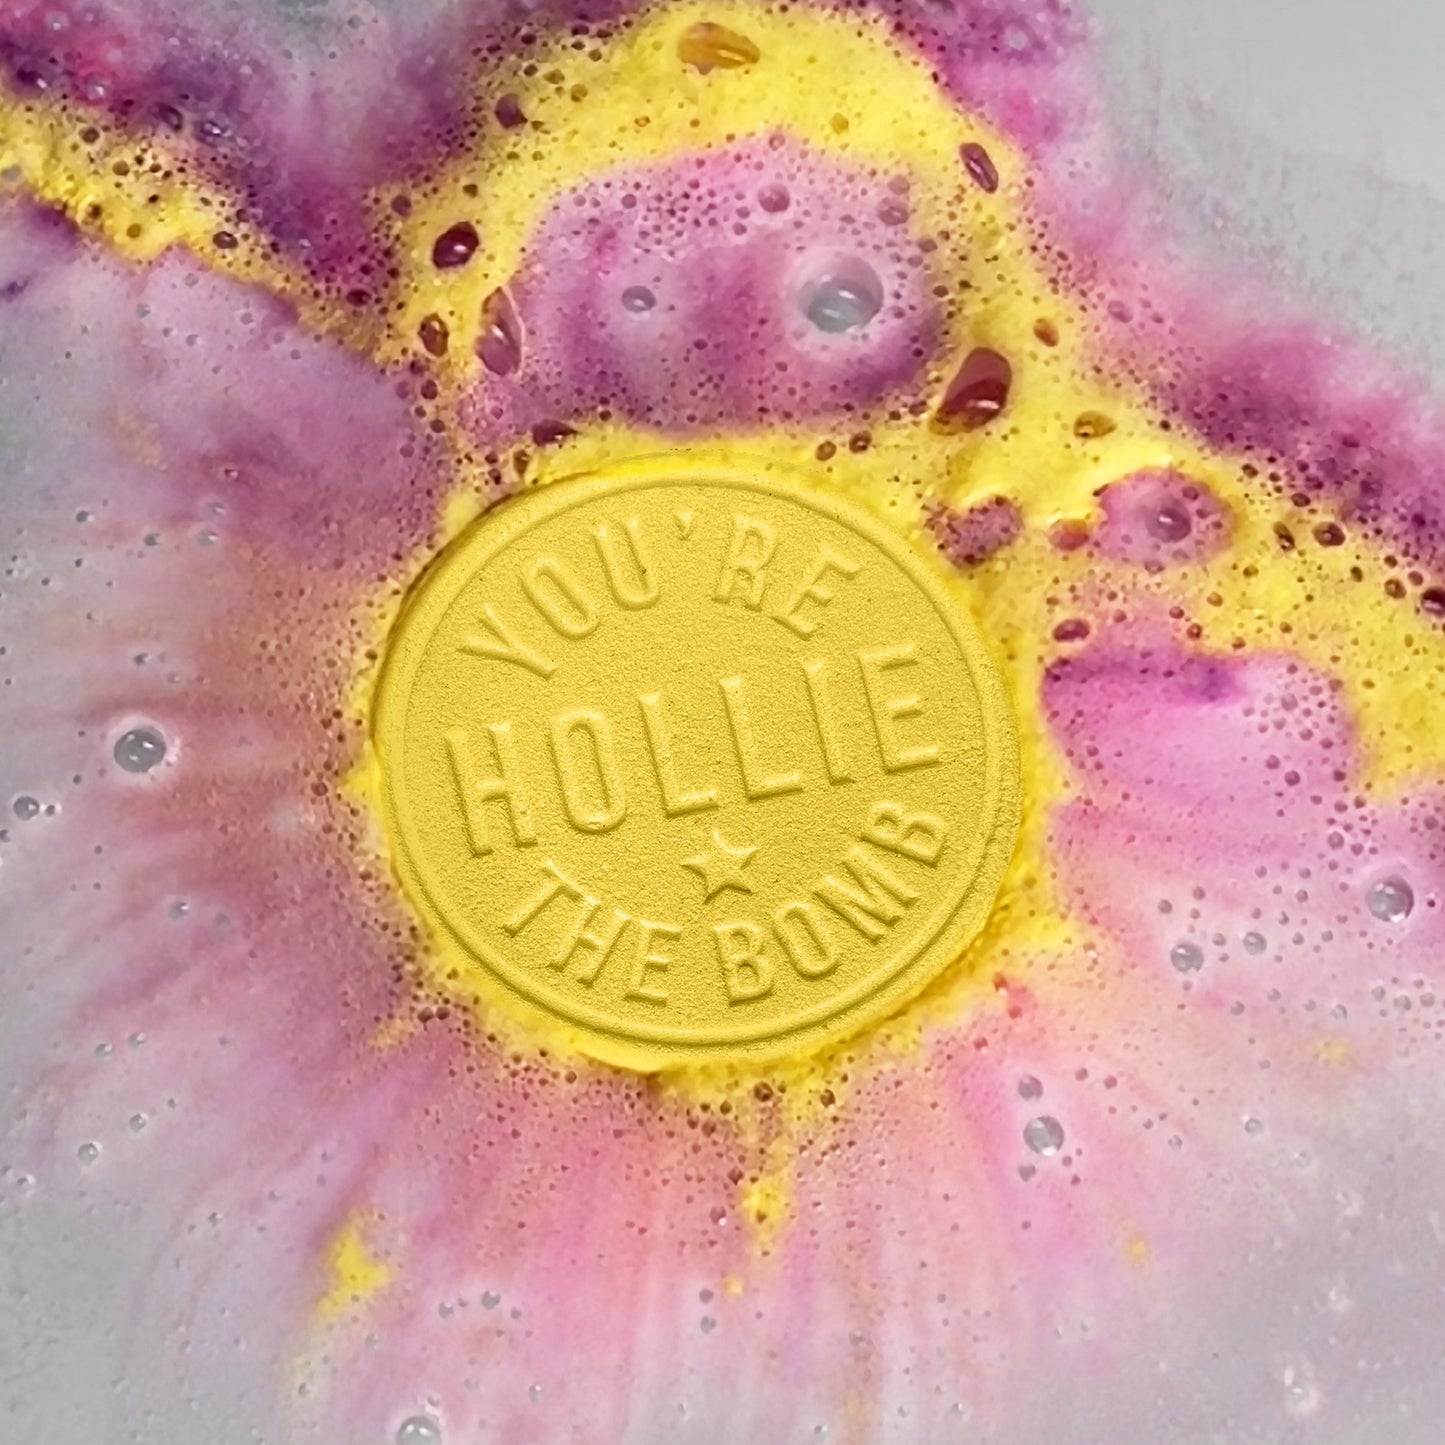 H&H Personalised Scented Bath Bombs - Mollie